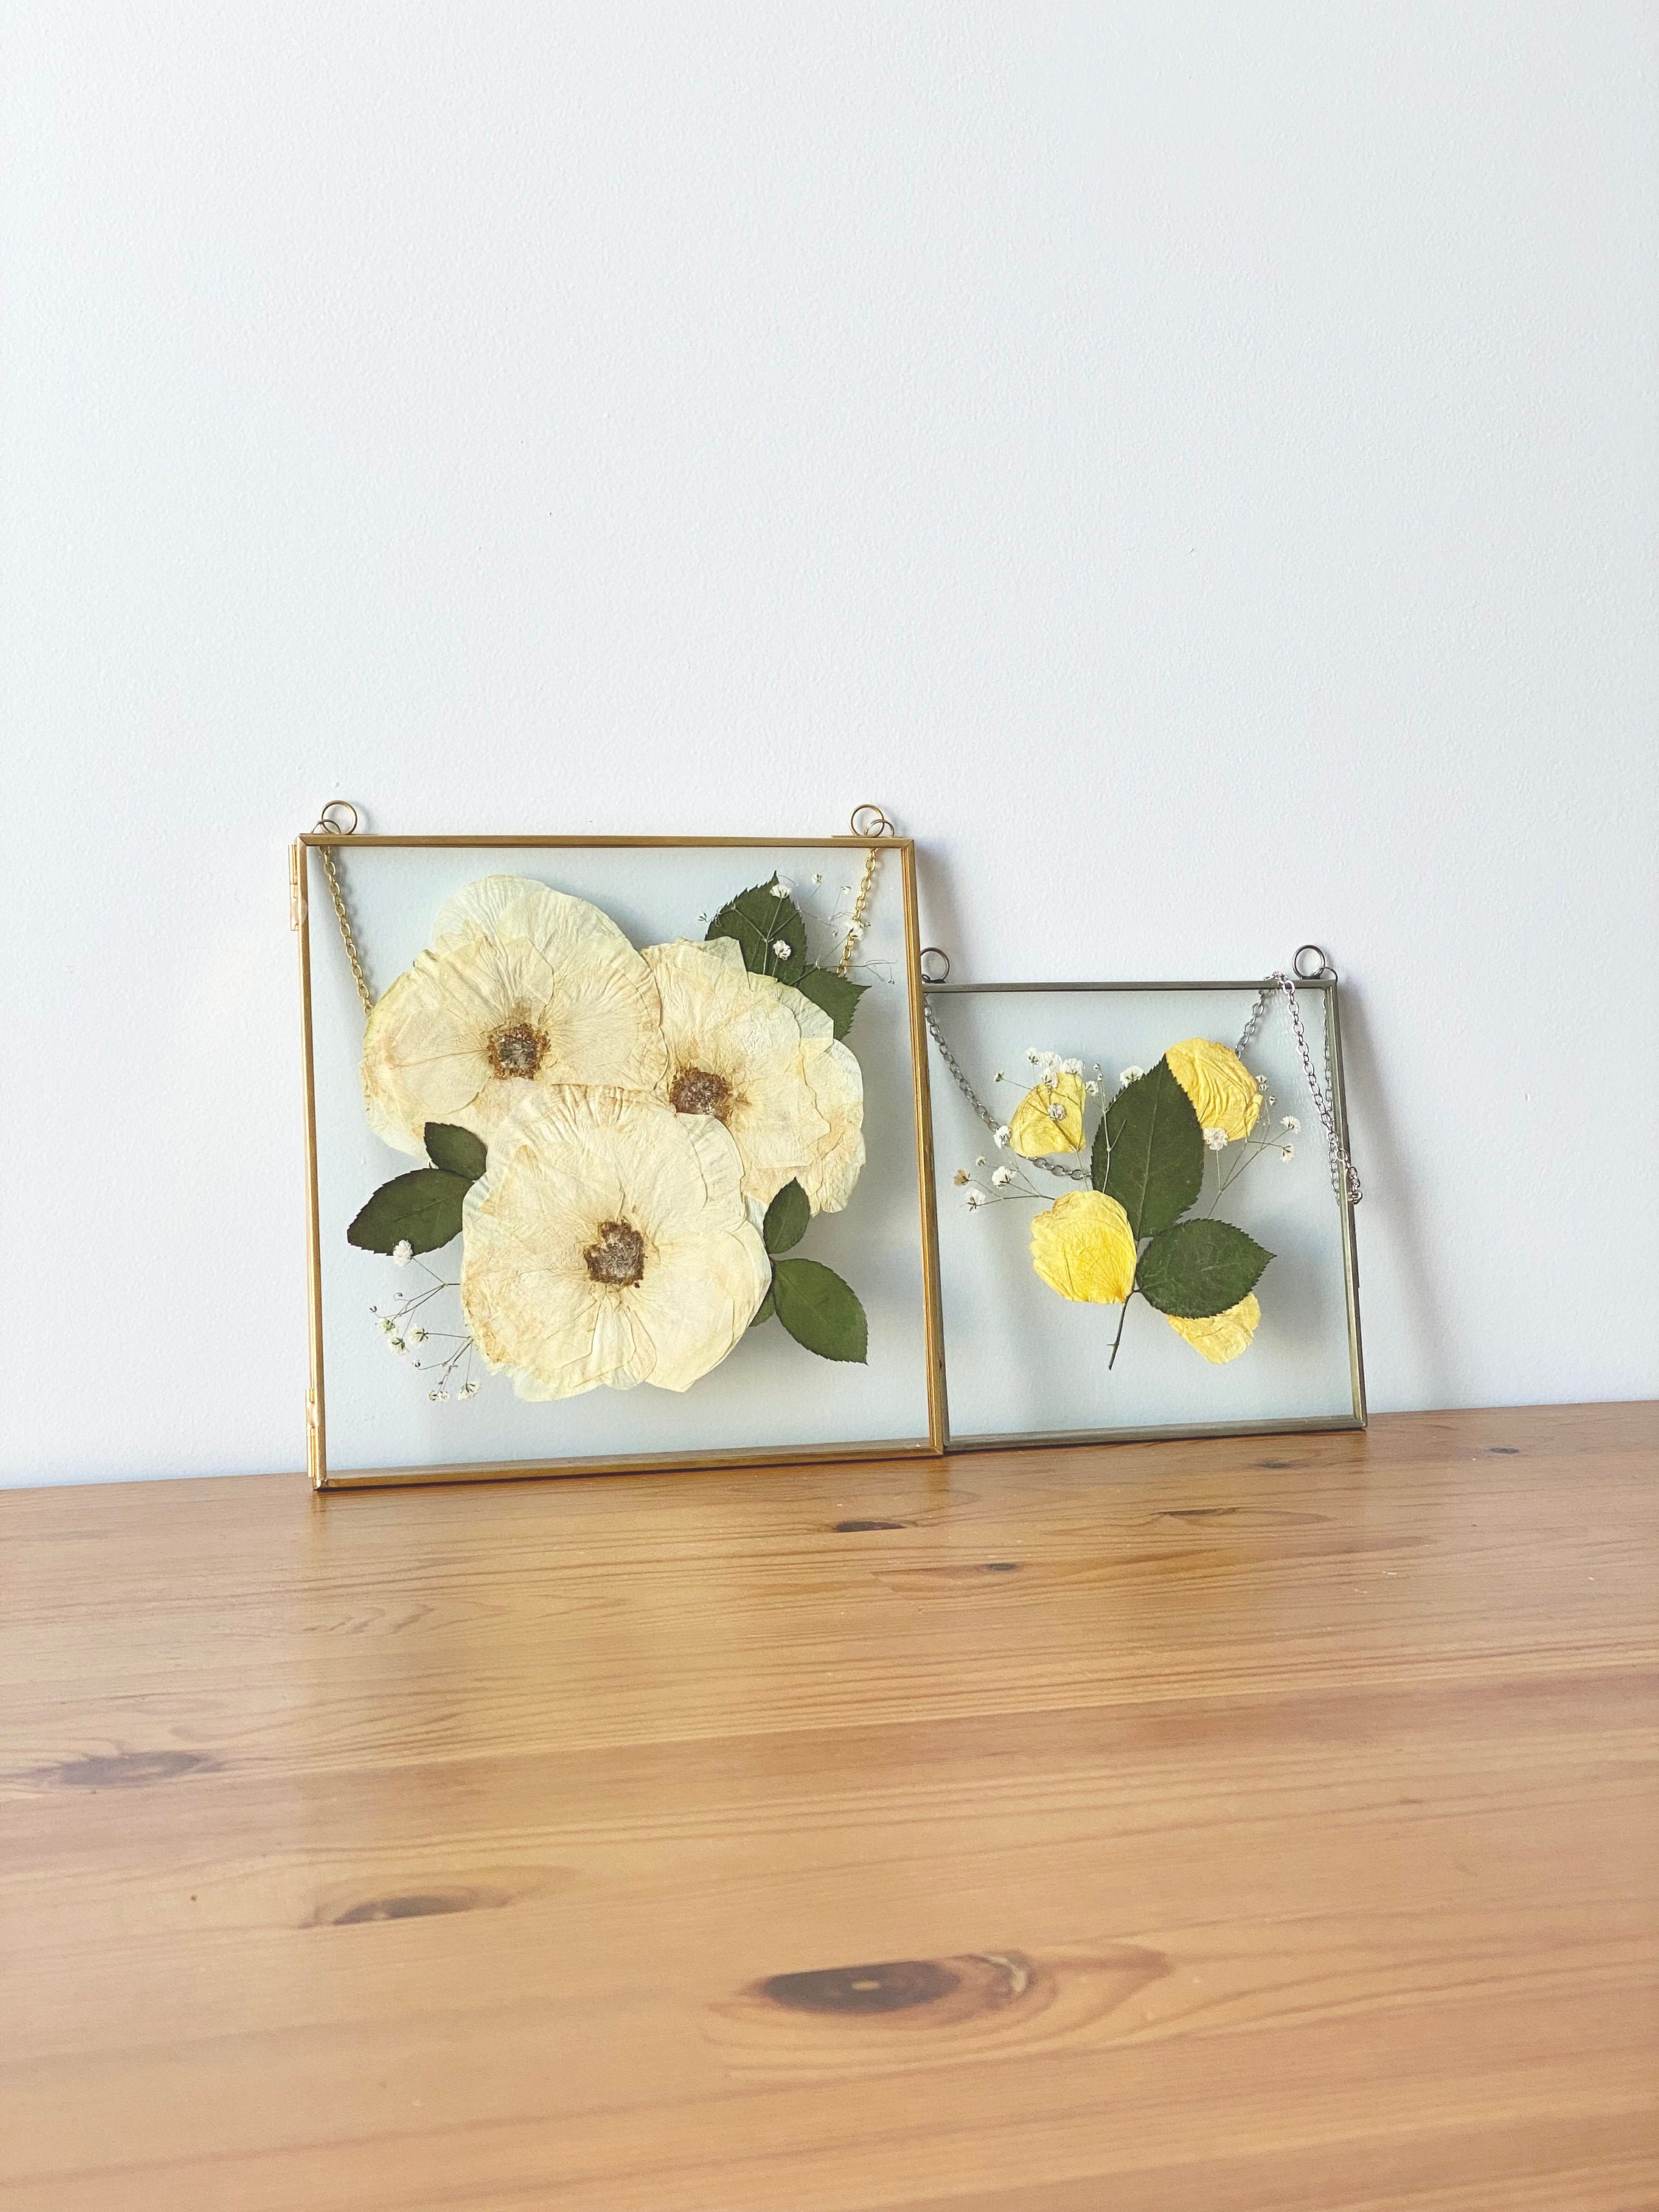 Circle Pressed Flowers, Large Pressed Flower, Pressed Flower Art, Floating  Frame, Pressed Flower Glass, Flower Wall, Office Decor, Boho 